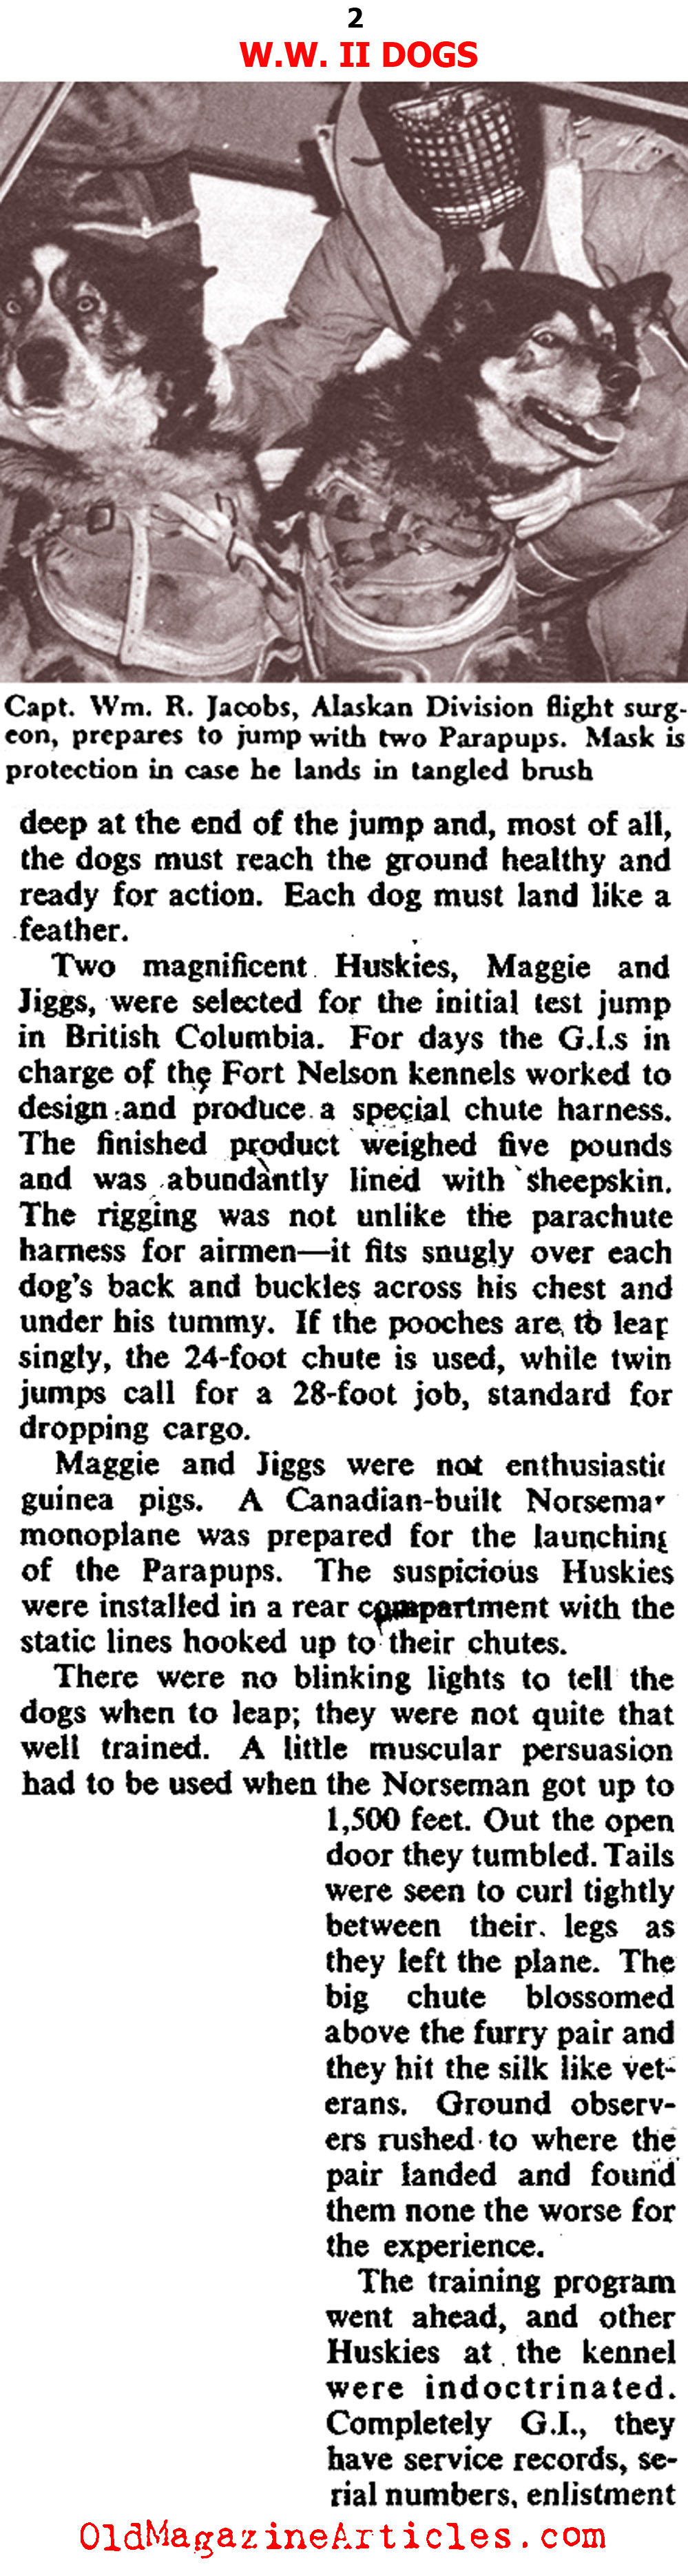 Dogs Used in the Rescue of Downed Pilots (Collier's, 1945) 